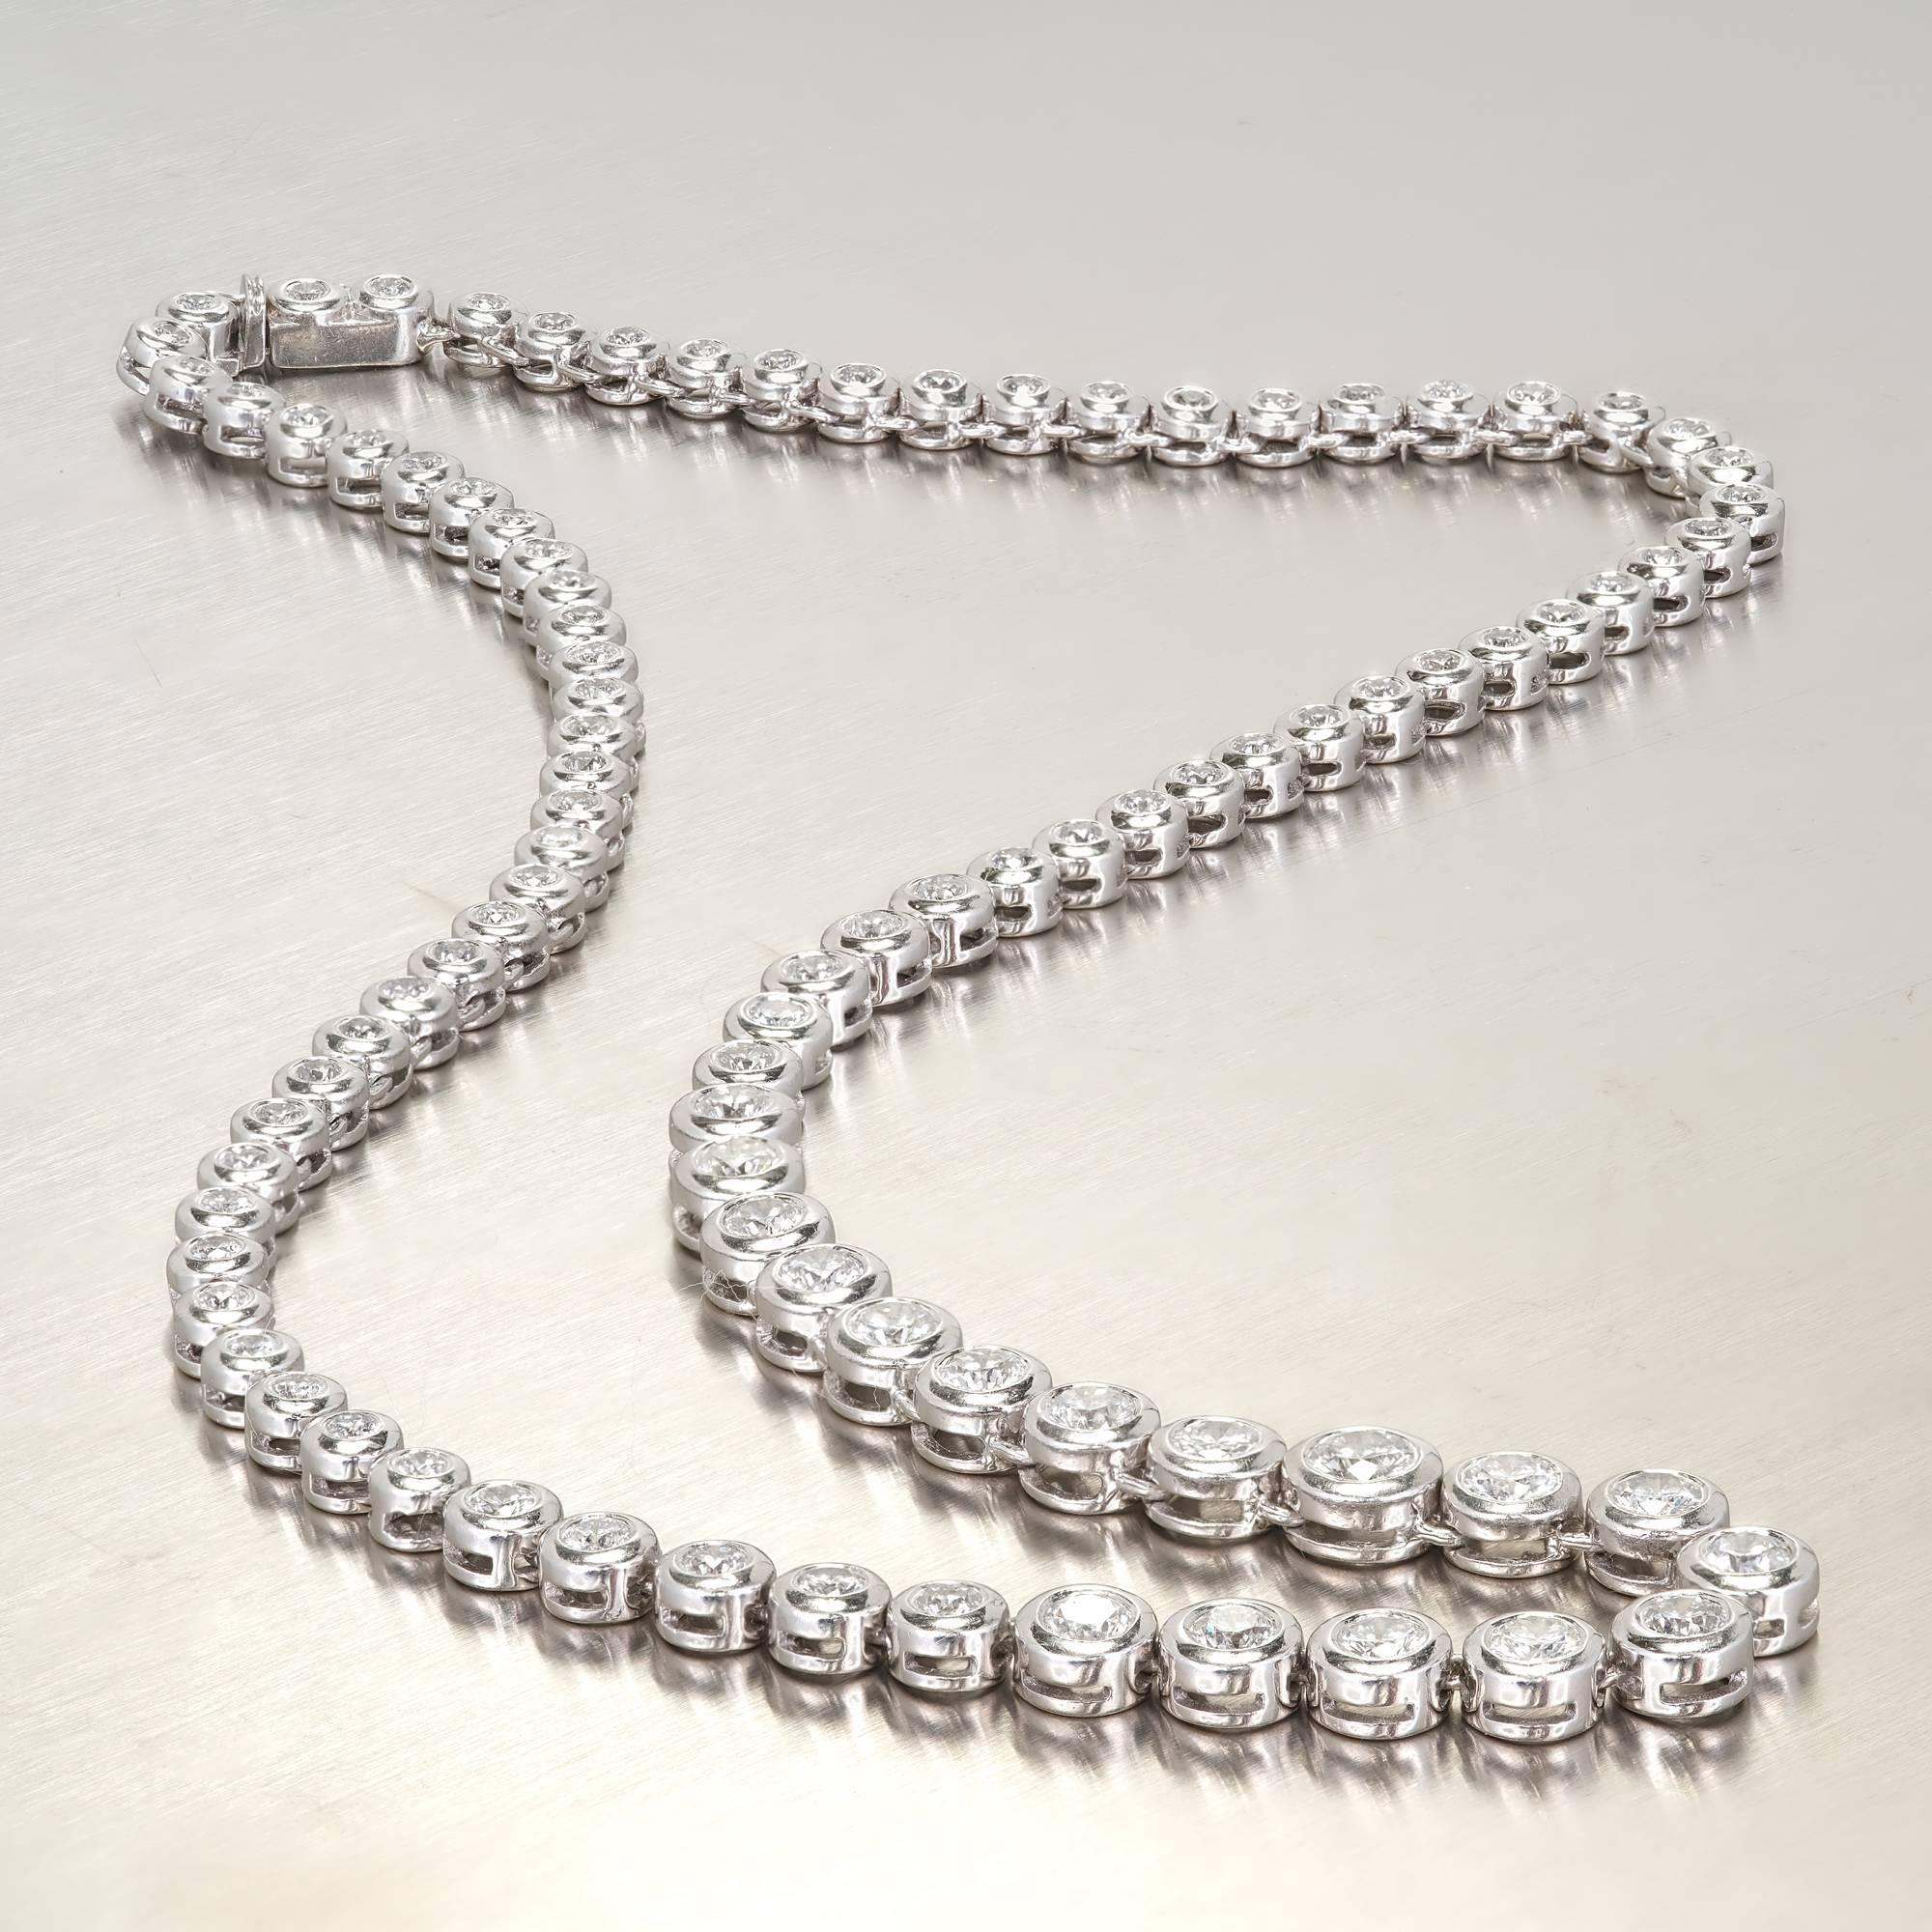 Classic solid Platinum bezel set diamond tennis necklace with well-cut H, VS to SI bright white shiny diamonds. Built in hidden catch and side lock safety.

93 diamonds, approx. total weight 7.00cts, H, VS2 to SI1
Tested: Platinum
Stamped: